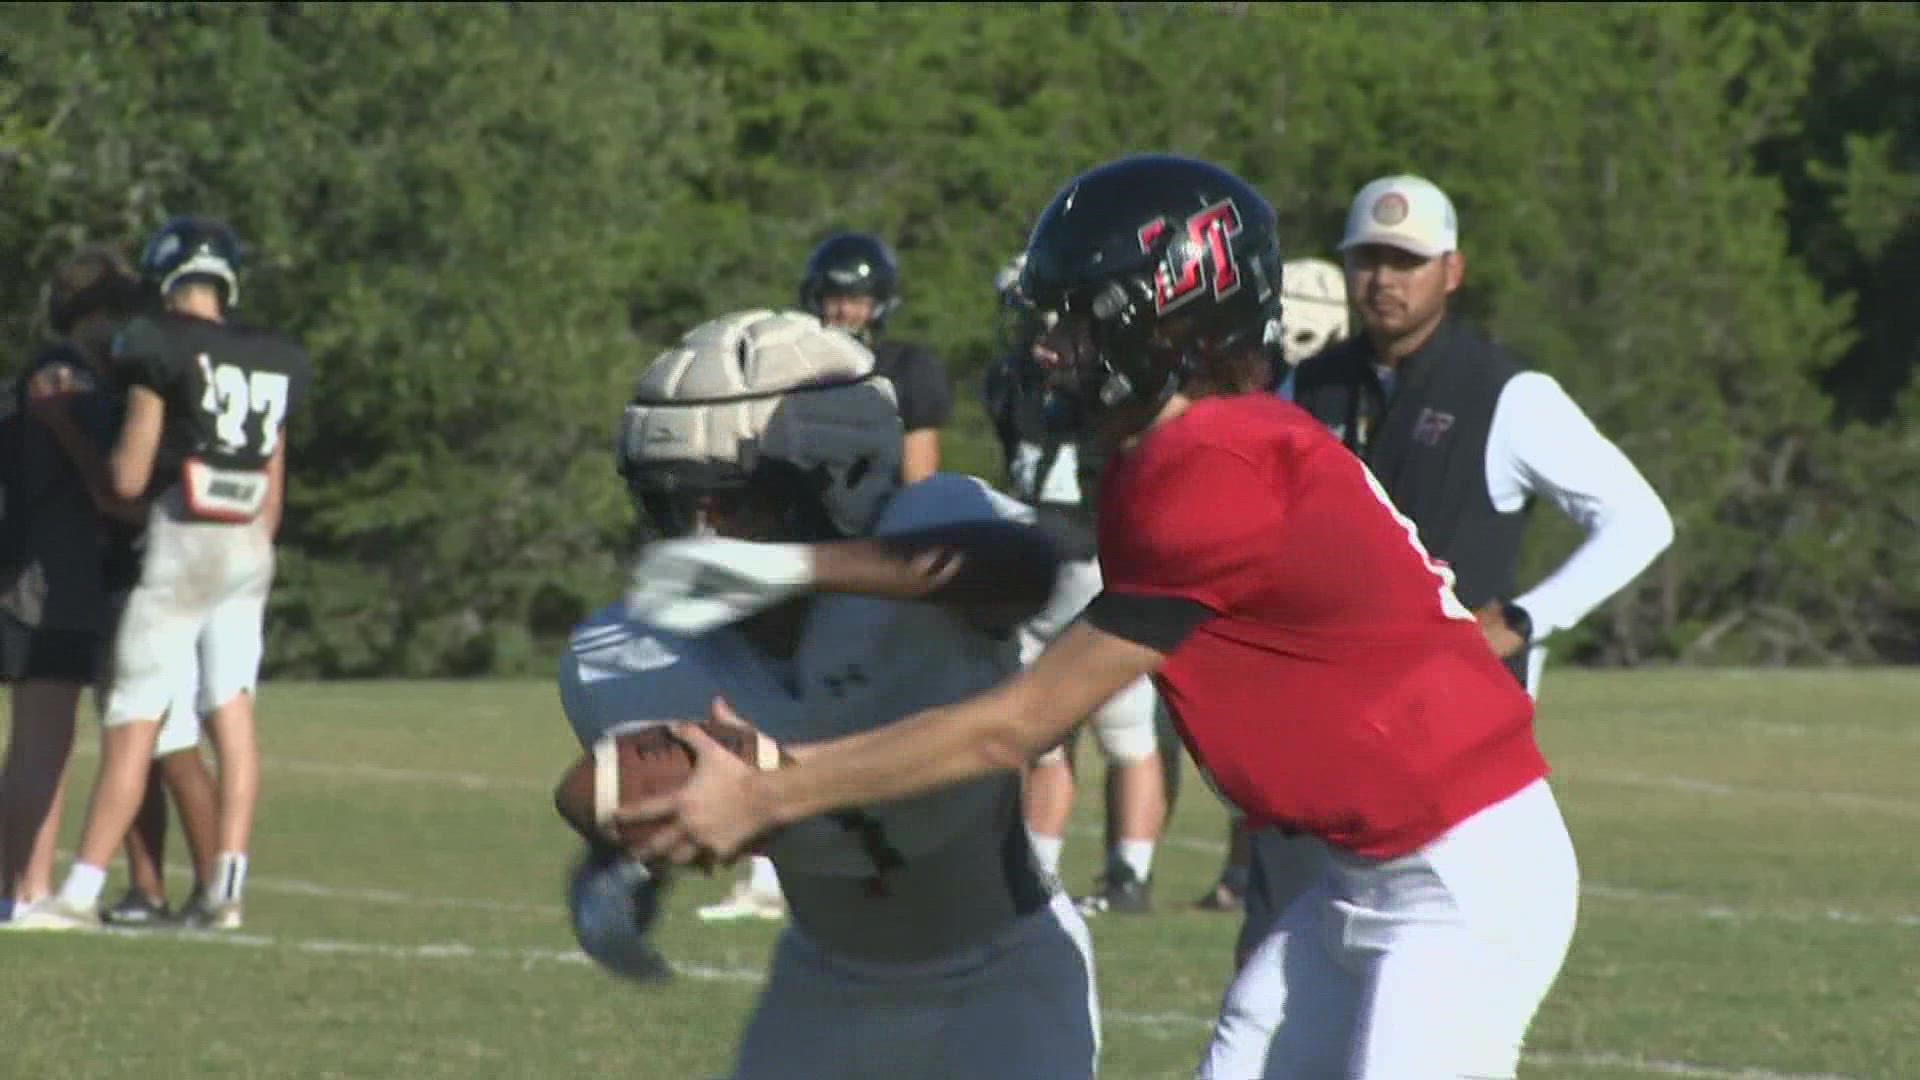 Local powerhouse football teams Westlake and Lake Travis are set to play each other this Friday.